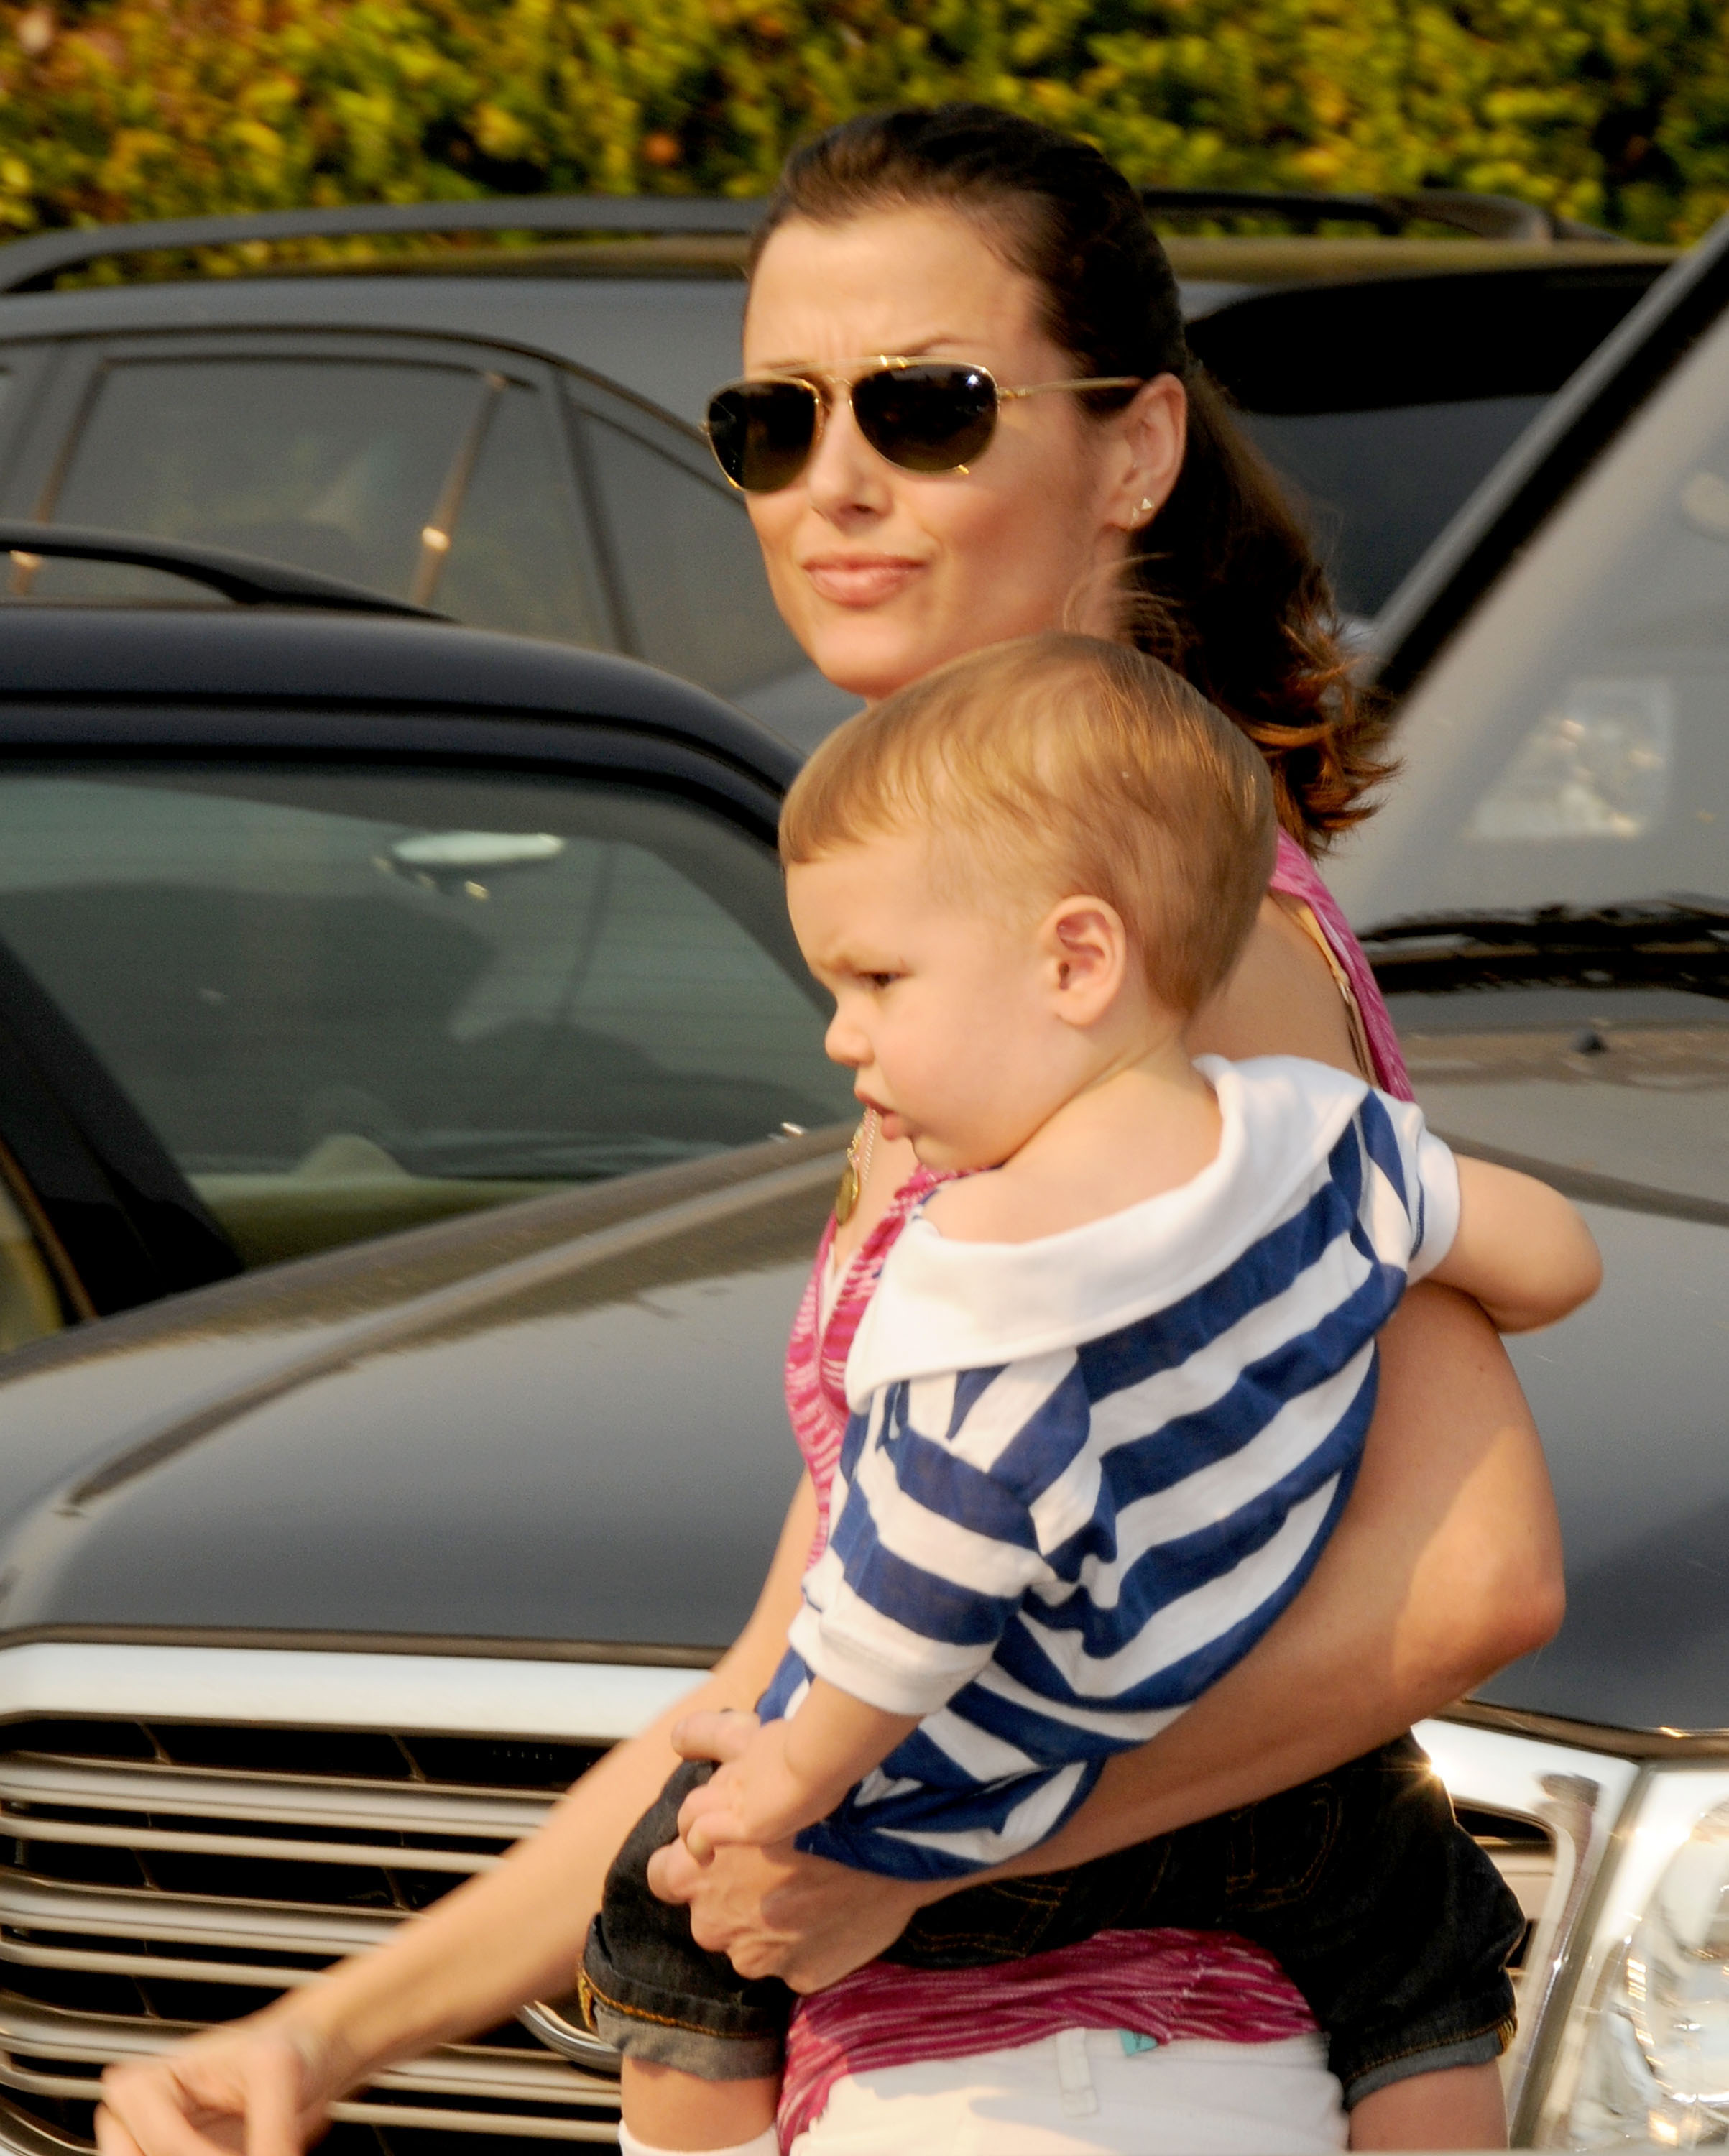 Bridget Moynahan and her son at the Santa Monica Airport, California on November 16, 2008 | Source: Getty Images